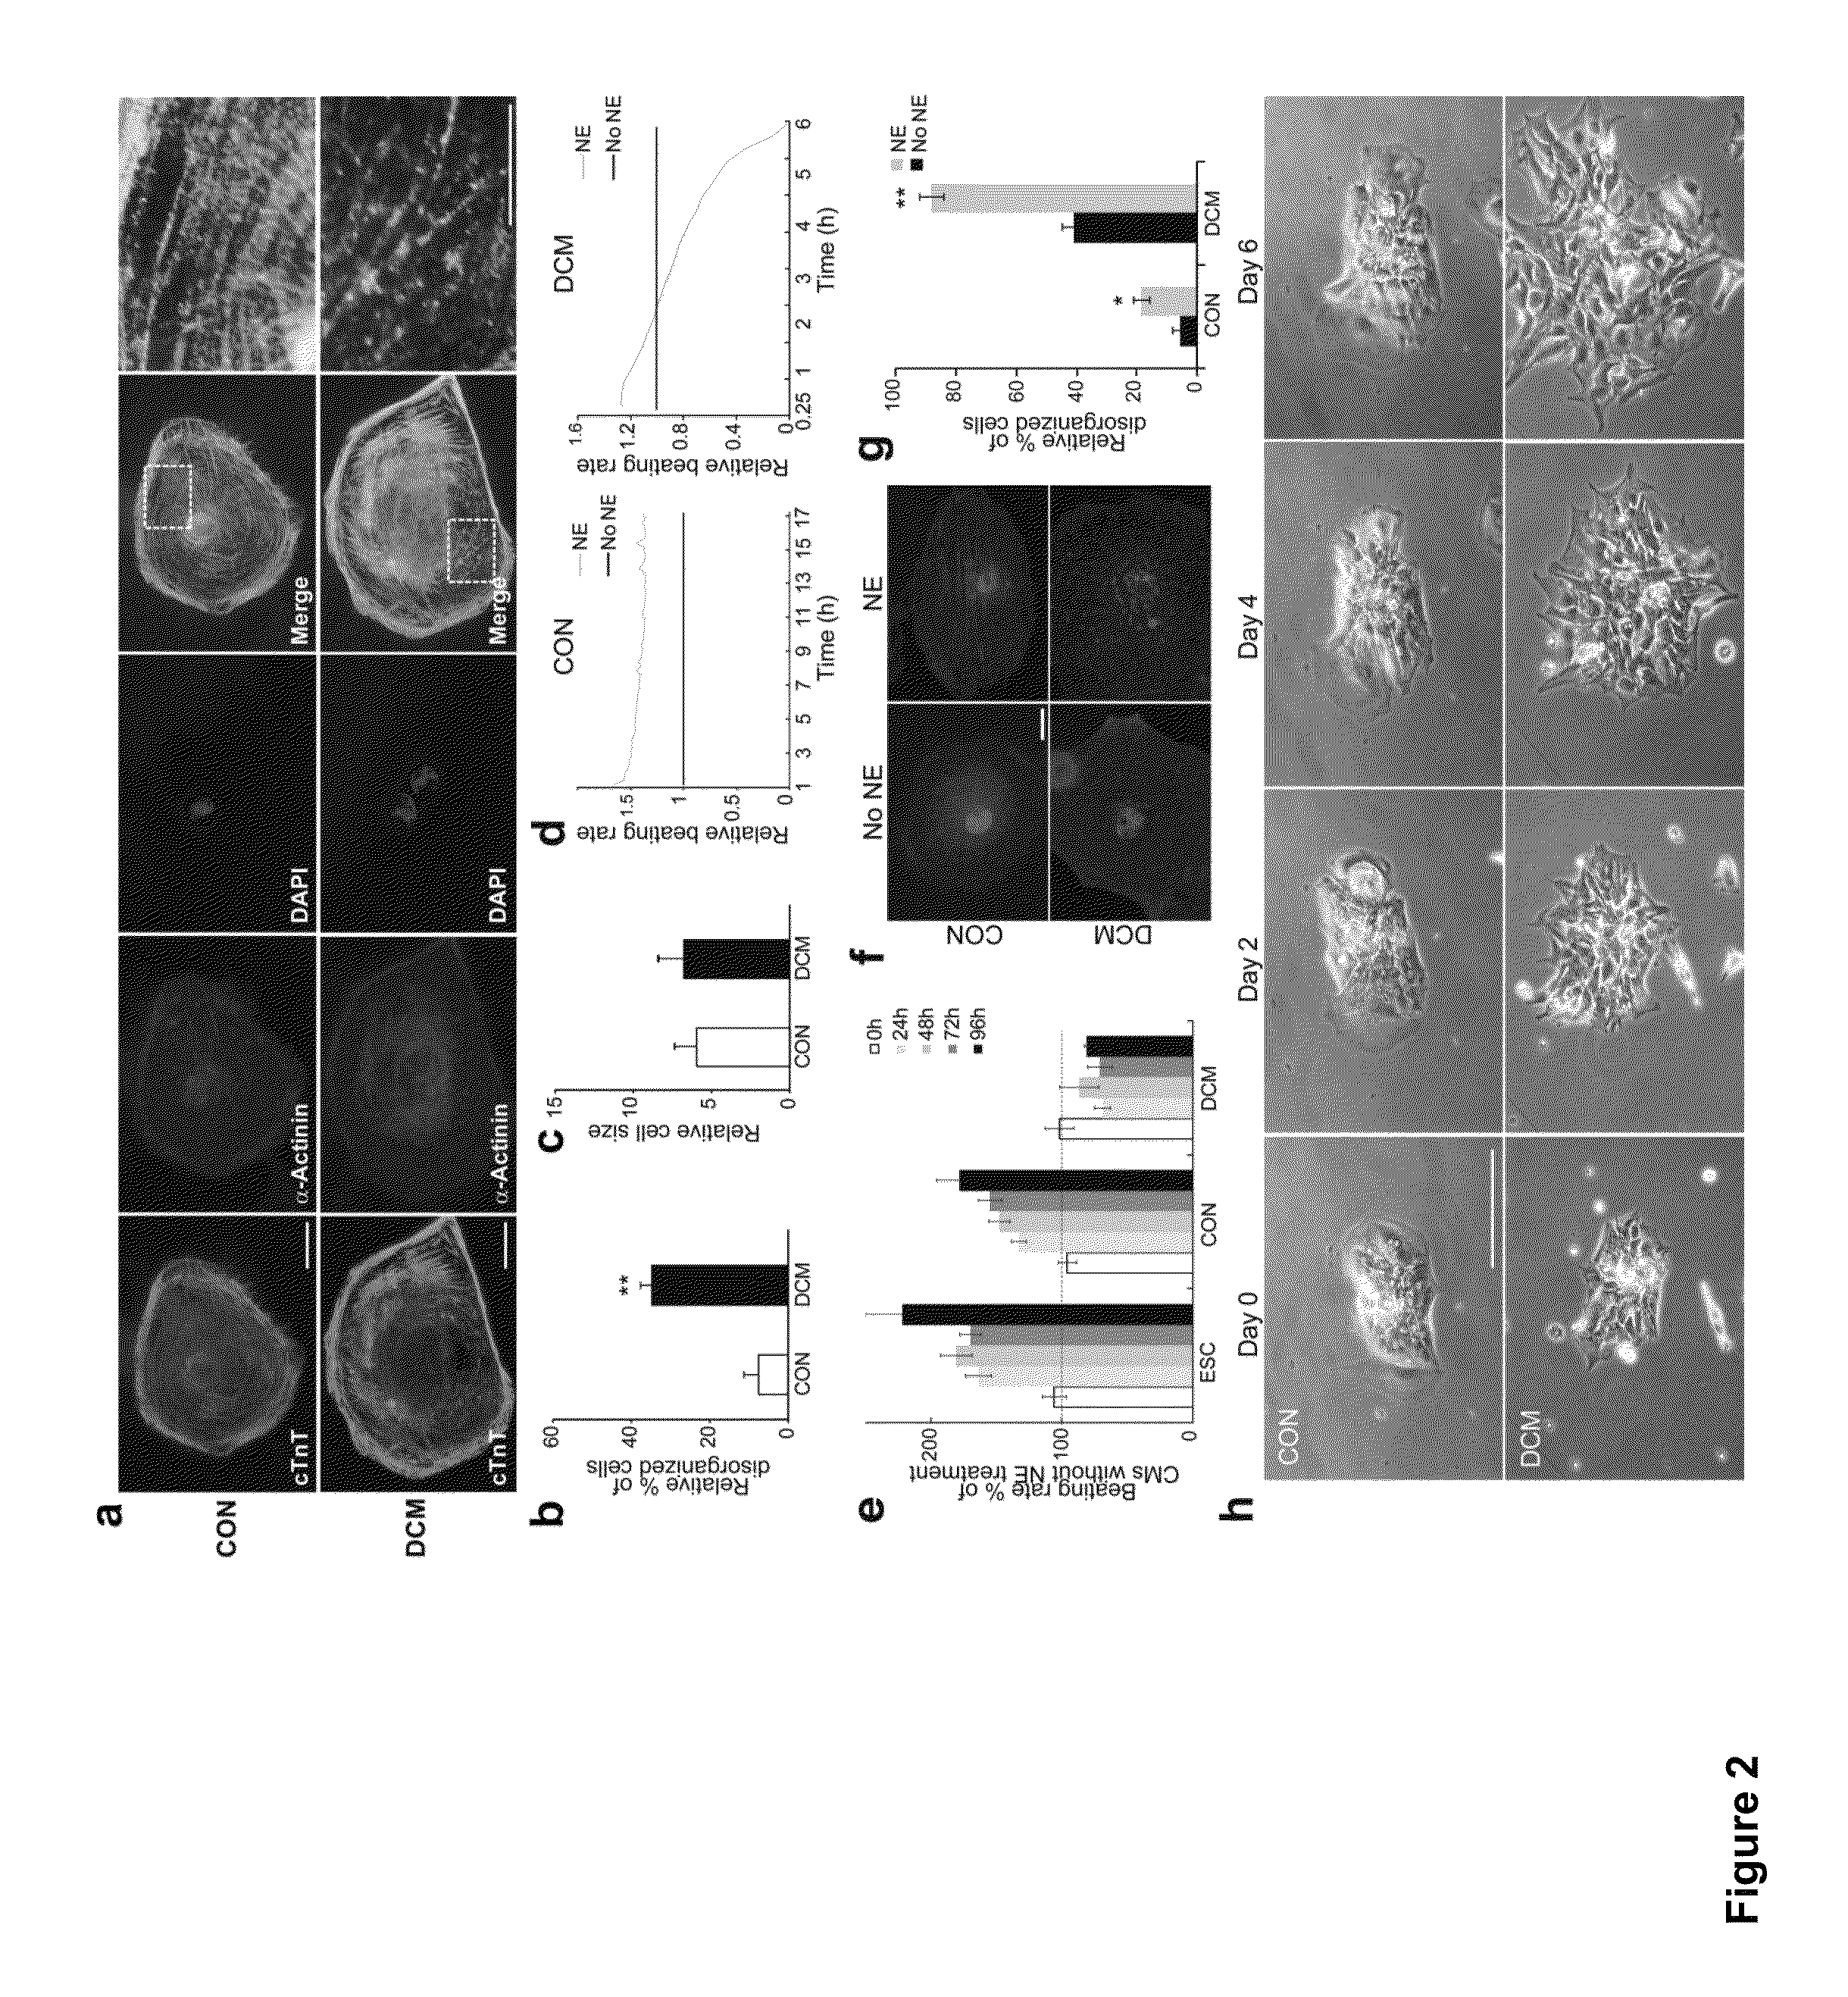 Cardiomyocytes from induced pluripotent stem cells from patients and methods of use thereof